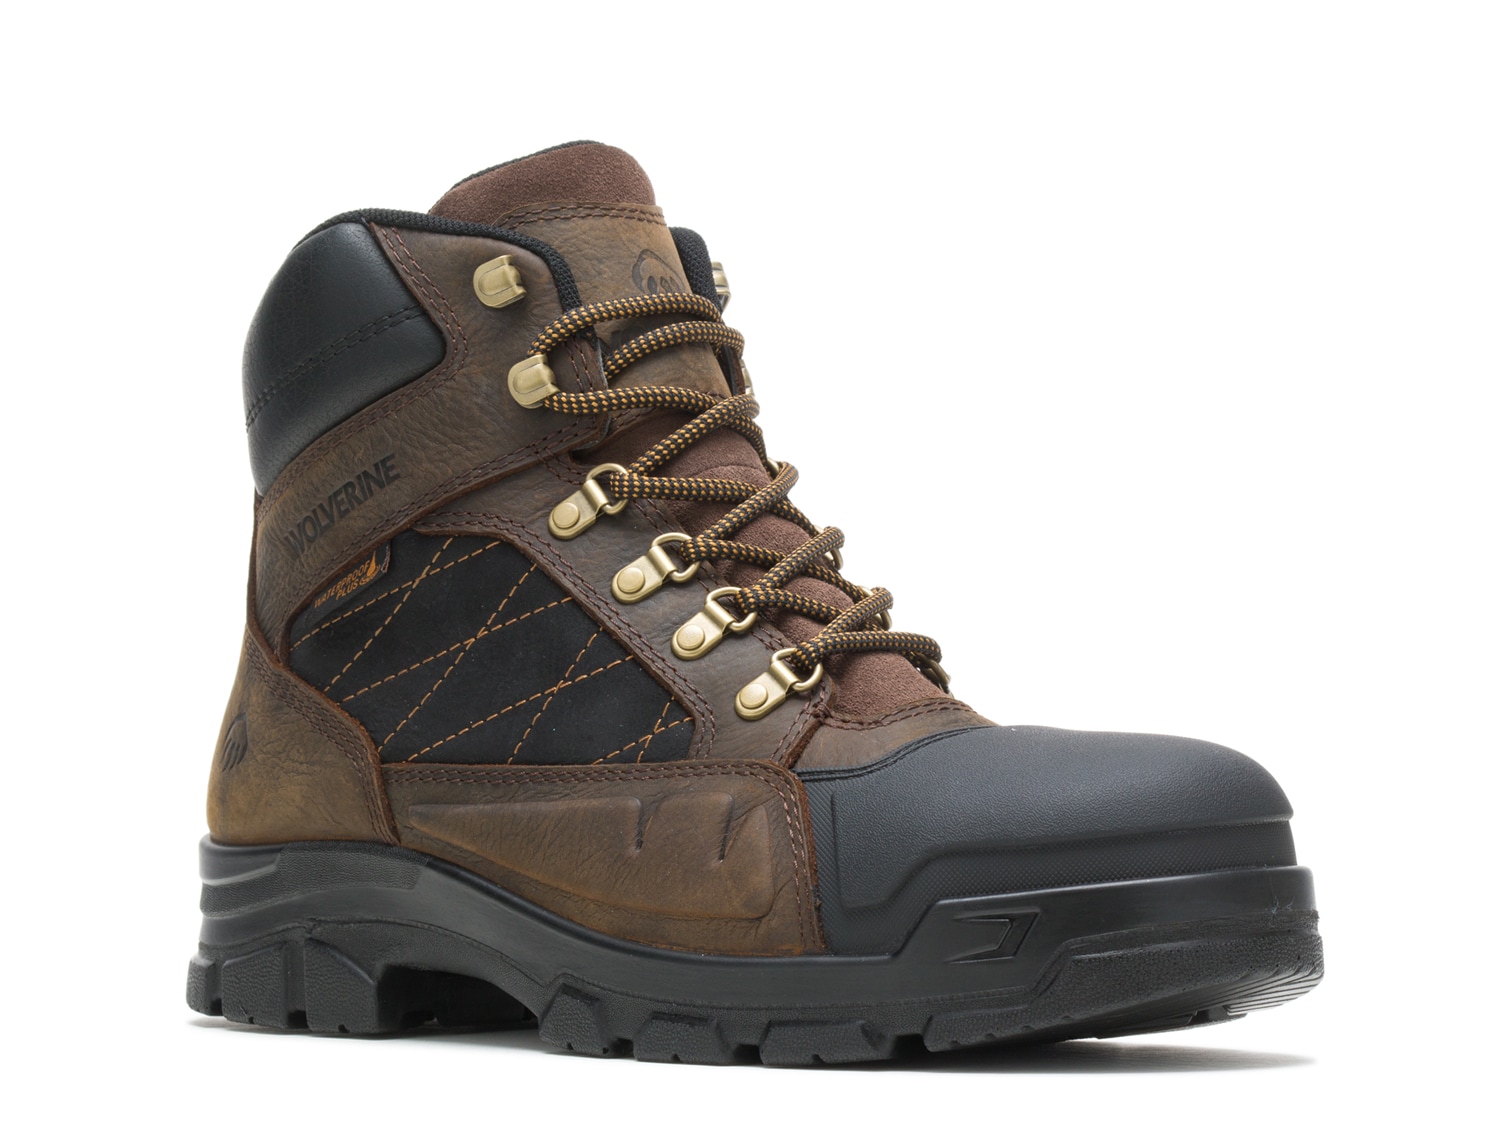 Wolverine Chainhand Guard Work Boot - Free Shipping | DSW